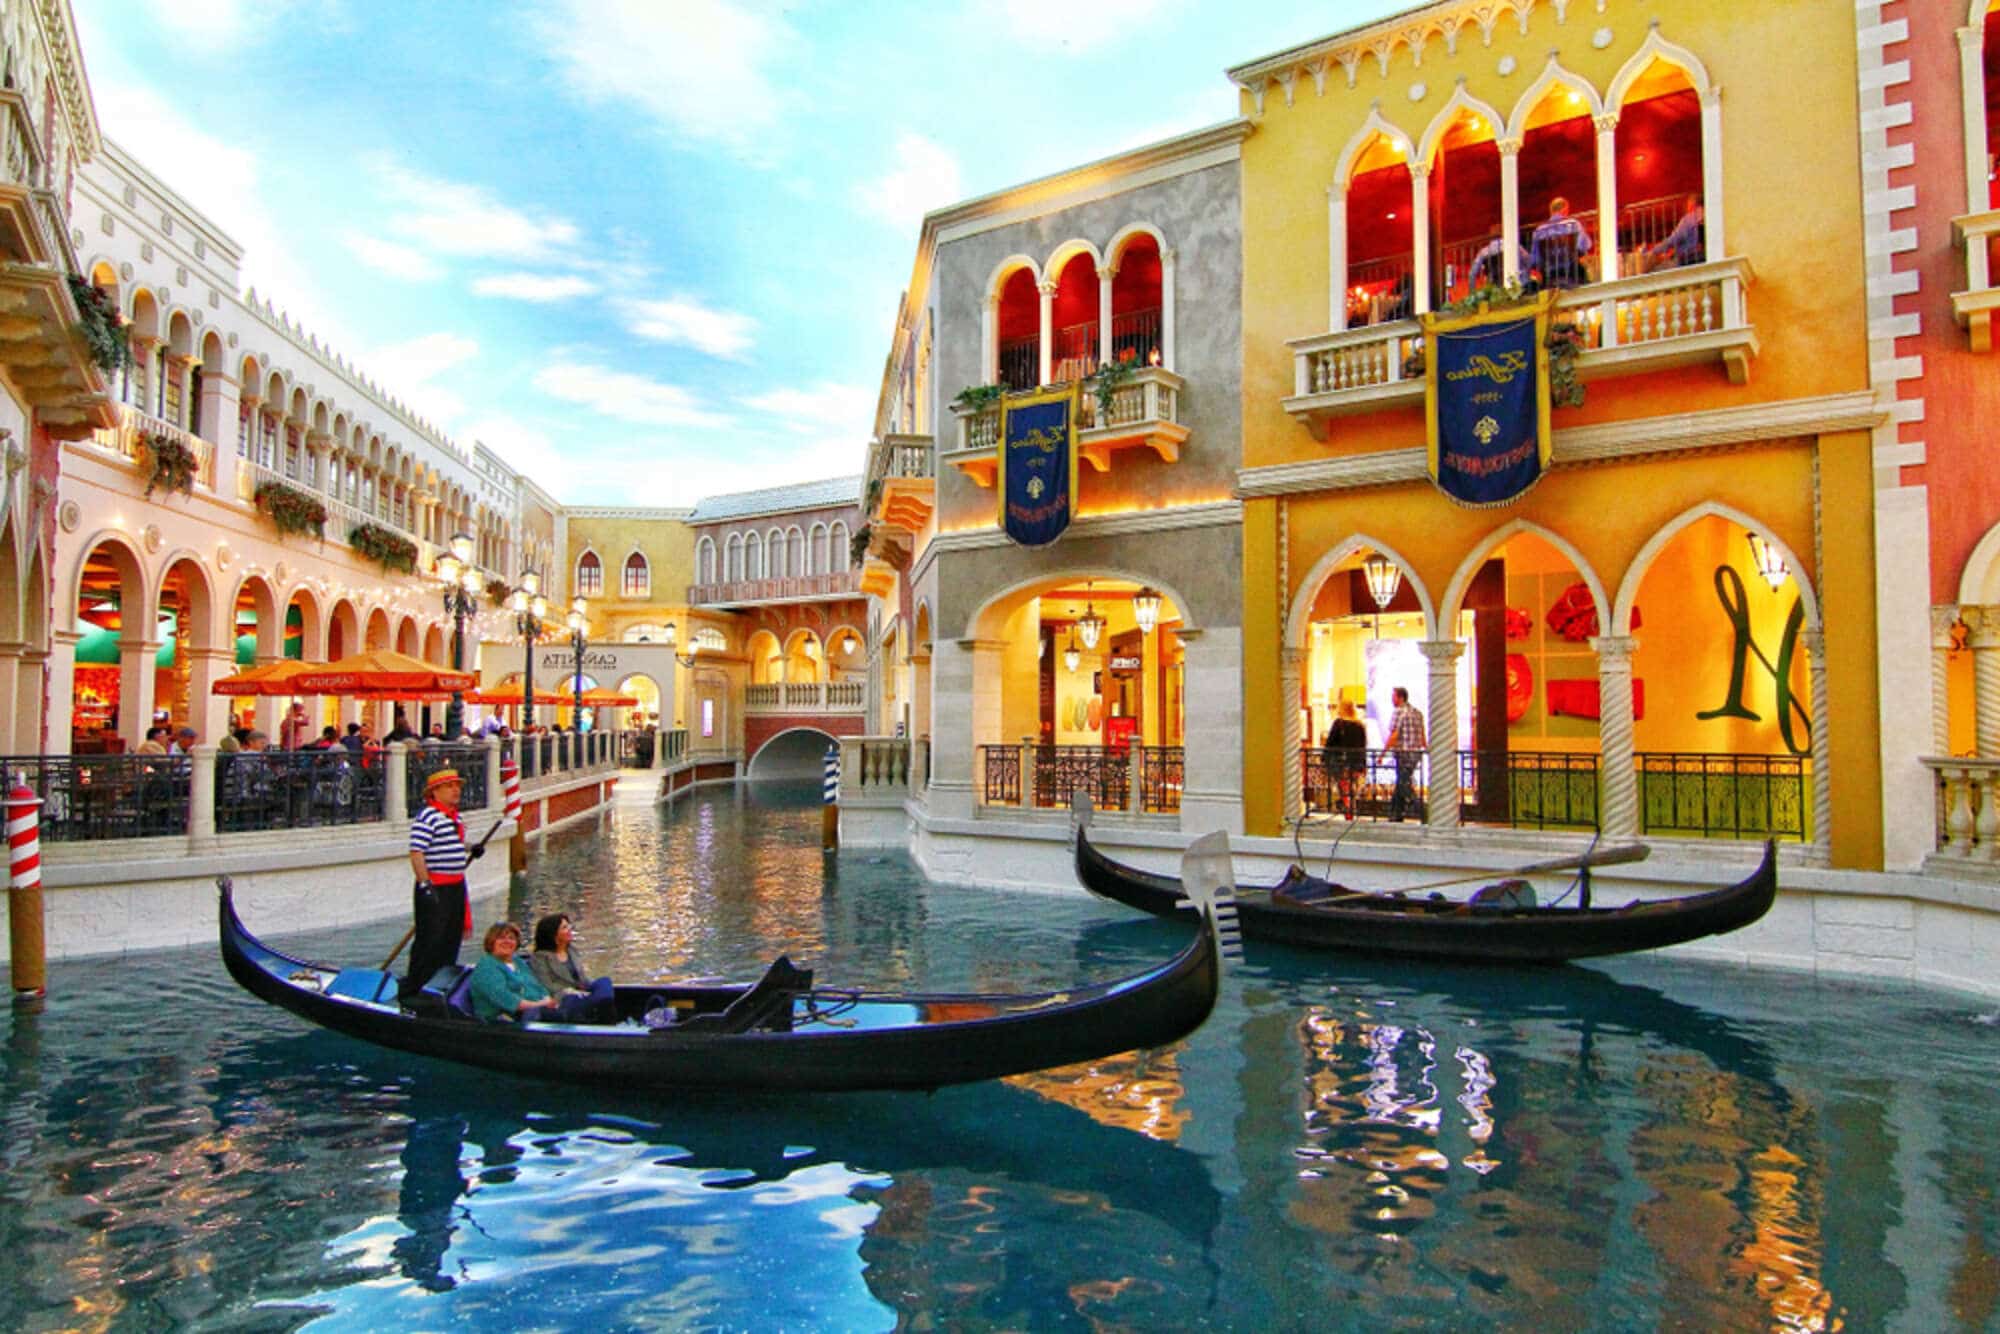 Image of a gondolier taking tourists through the canals in the Grand Canal Shoppes